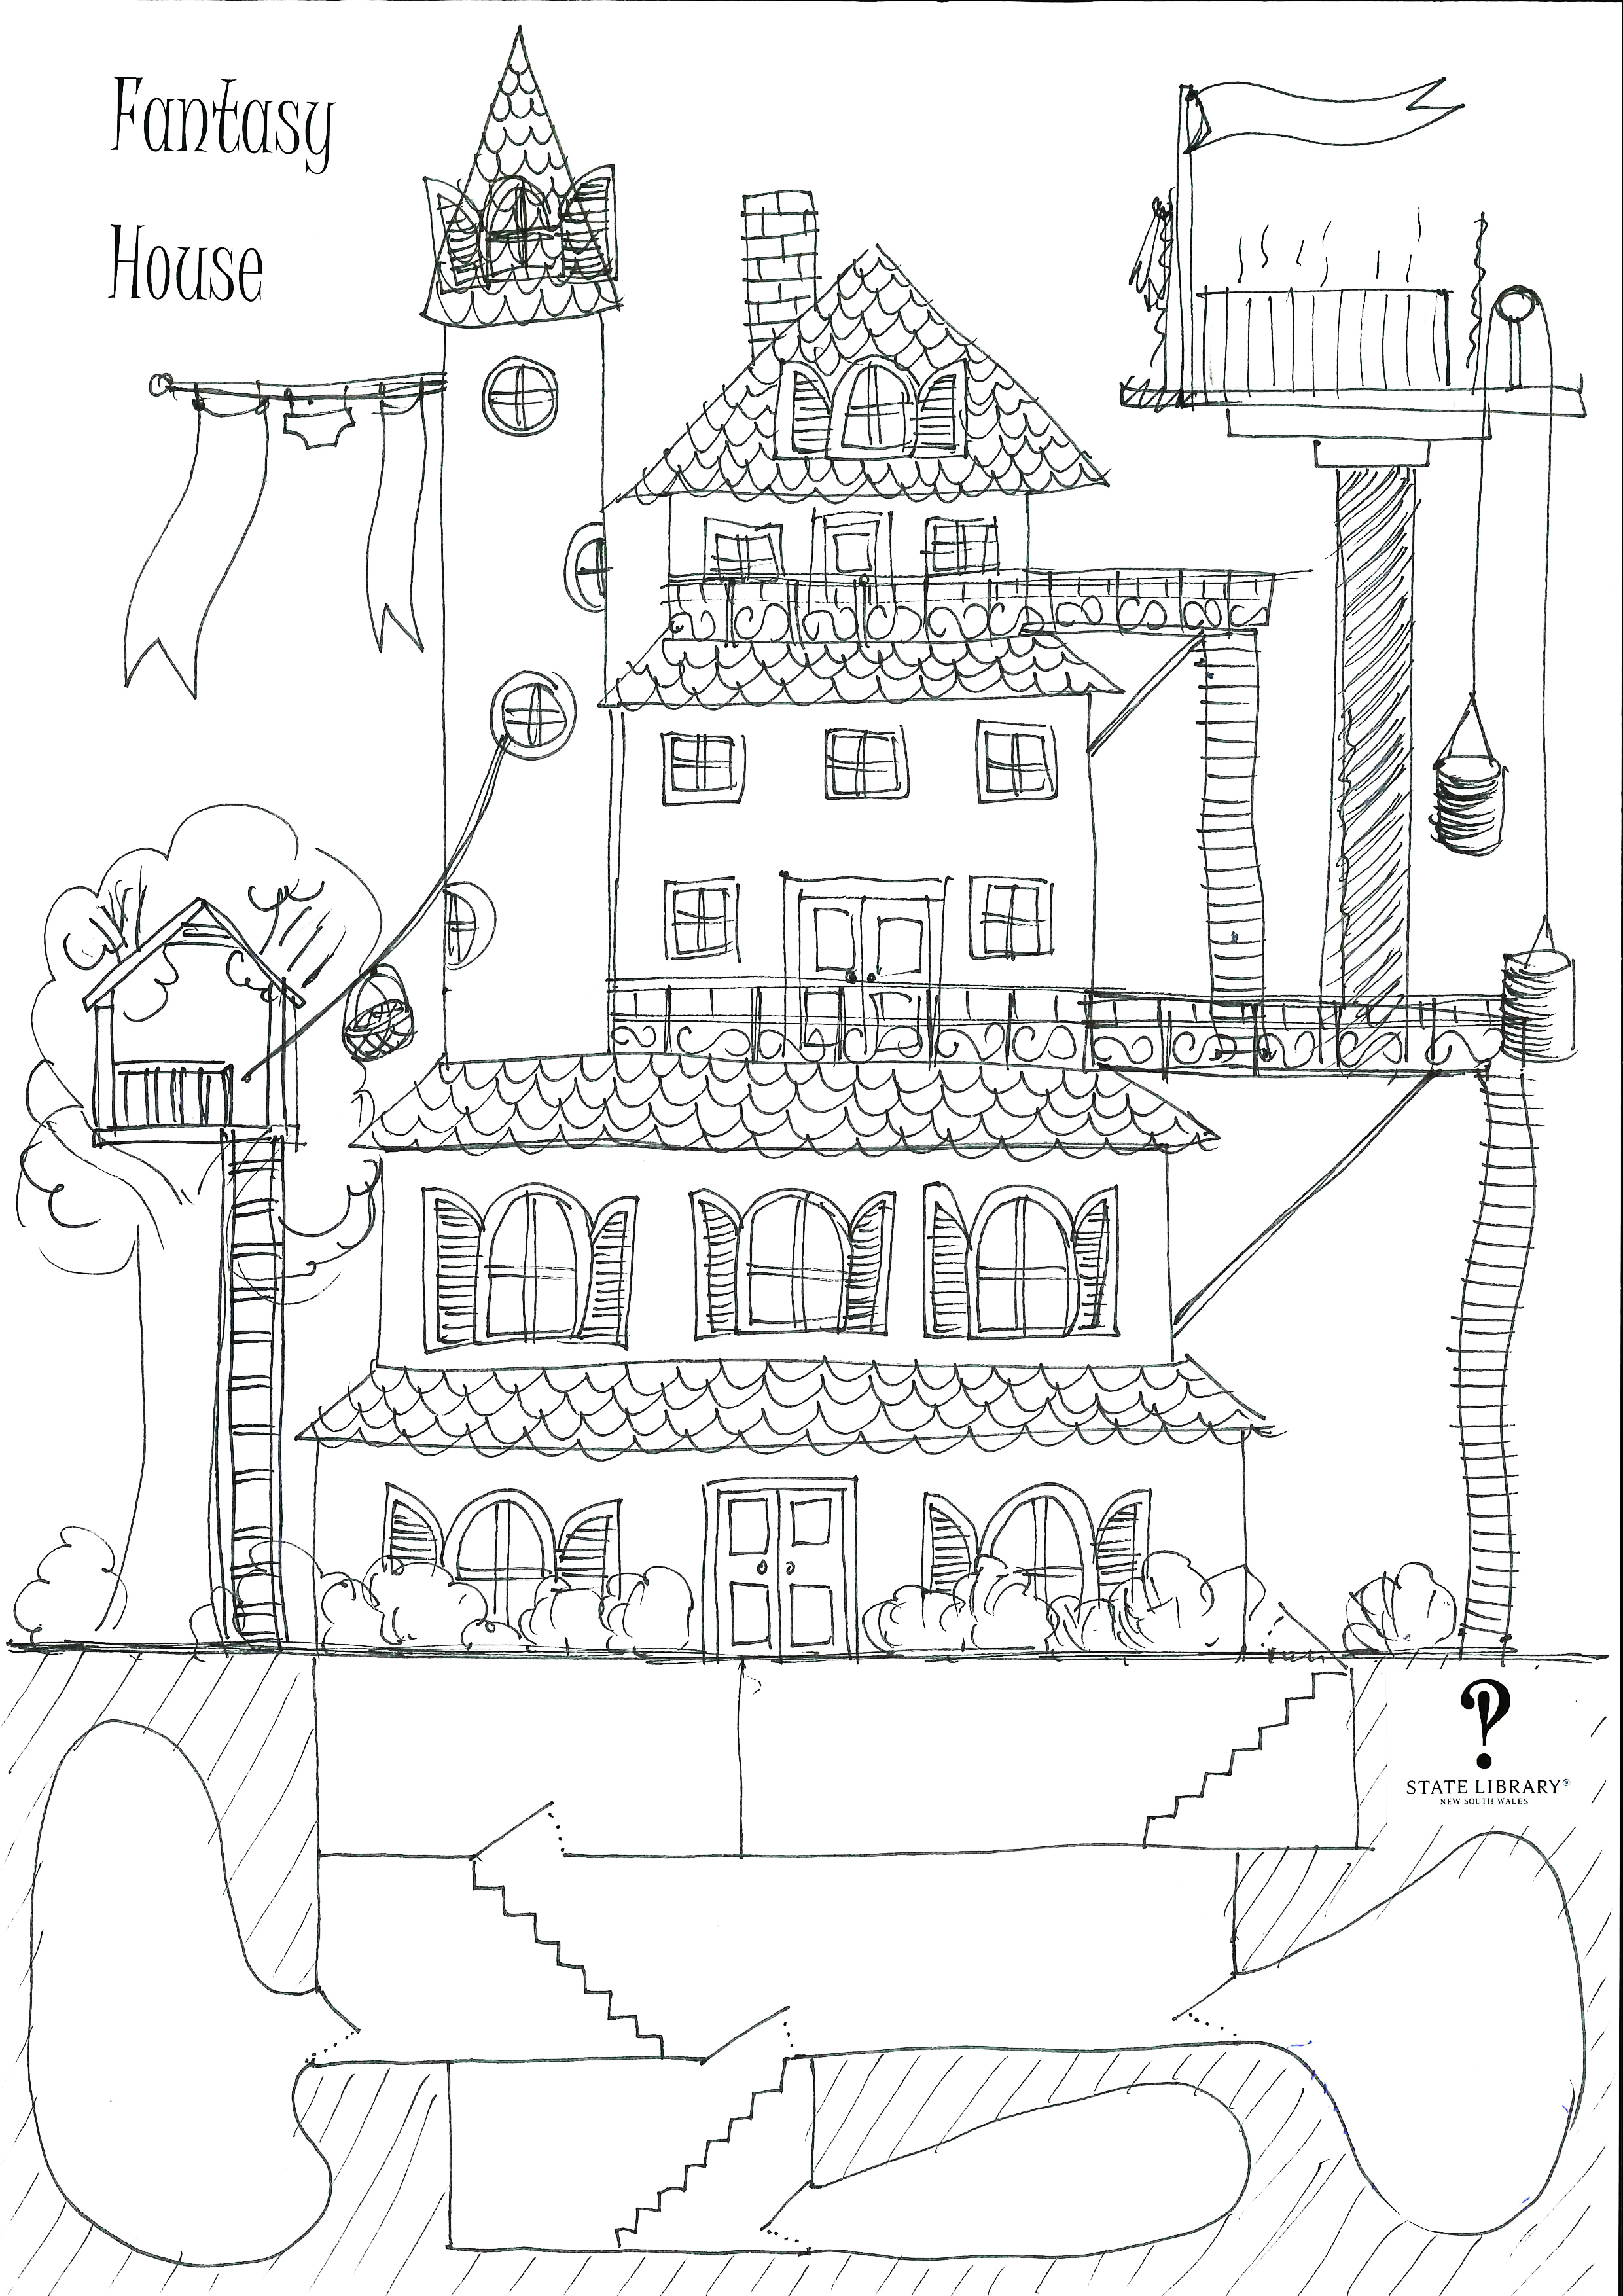 A black line drawing of a fantasy house